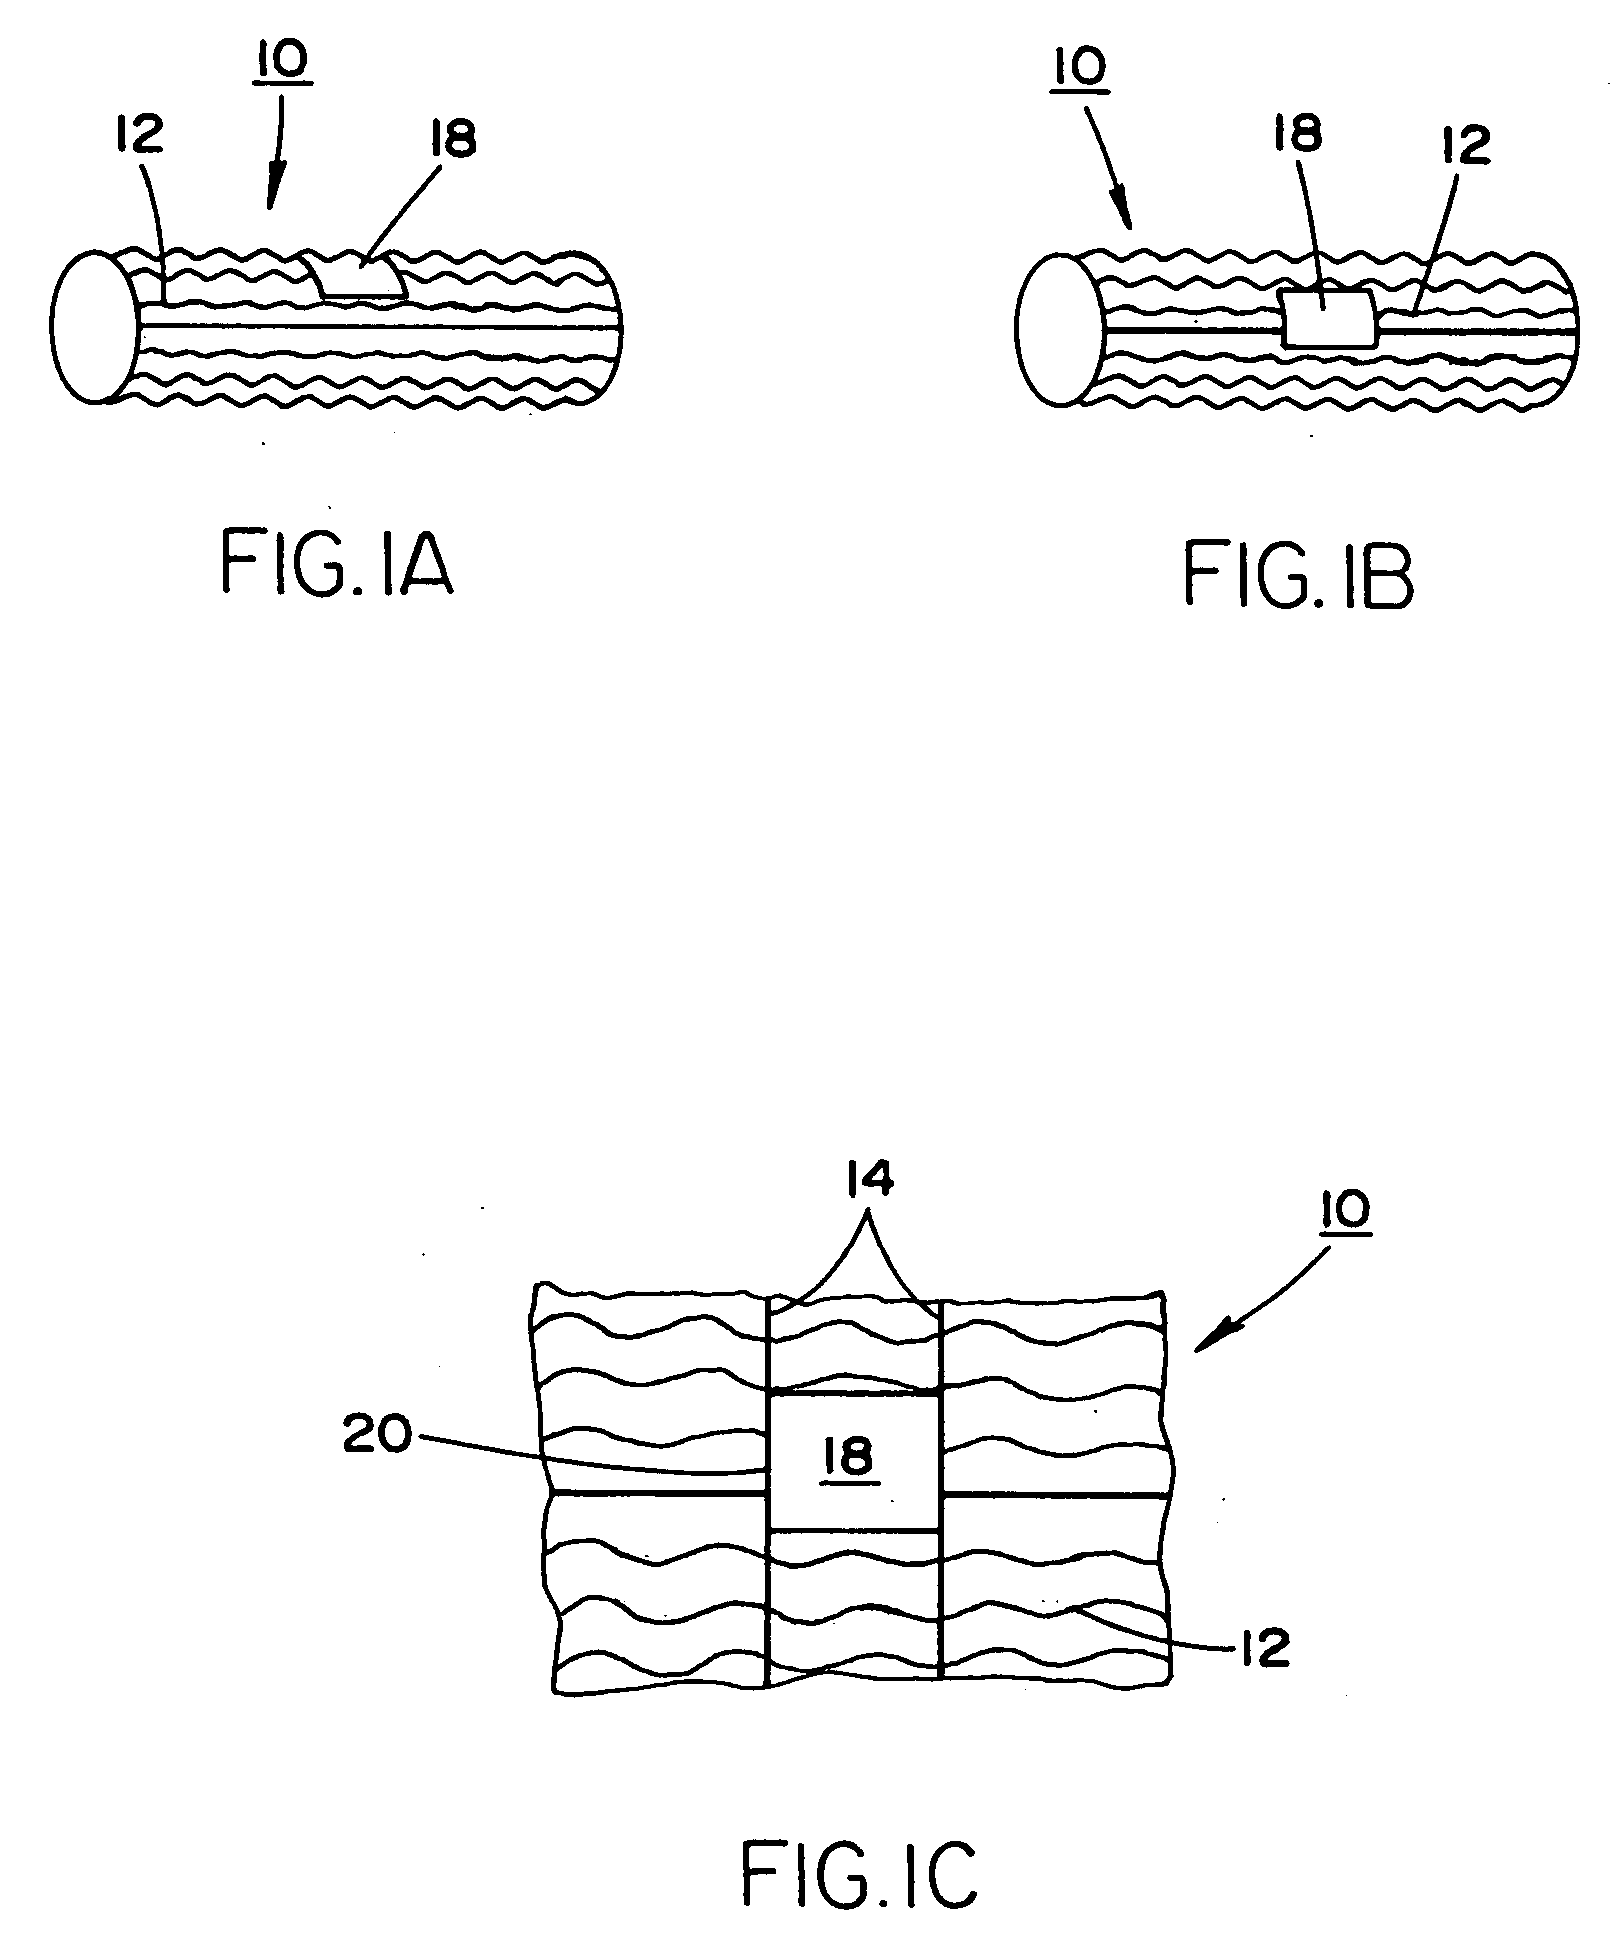 Stent and balloon system for bifurcated vessels and lesions